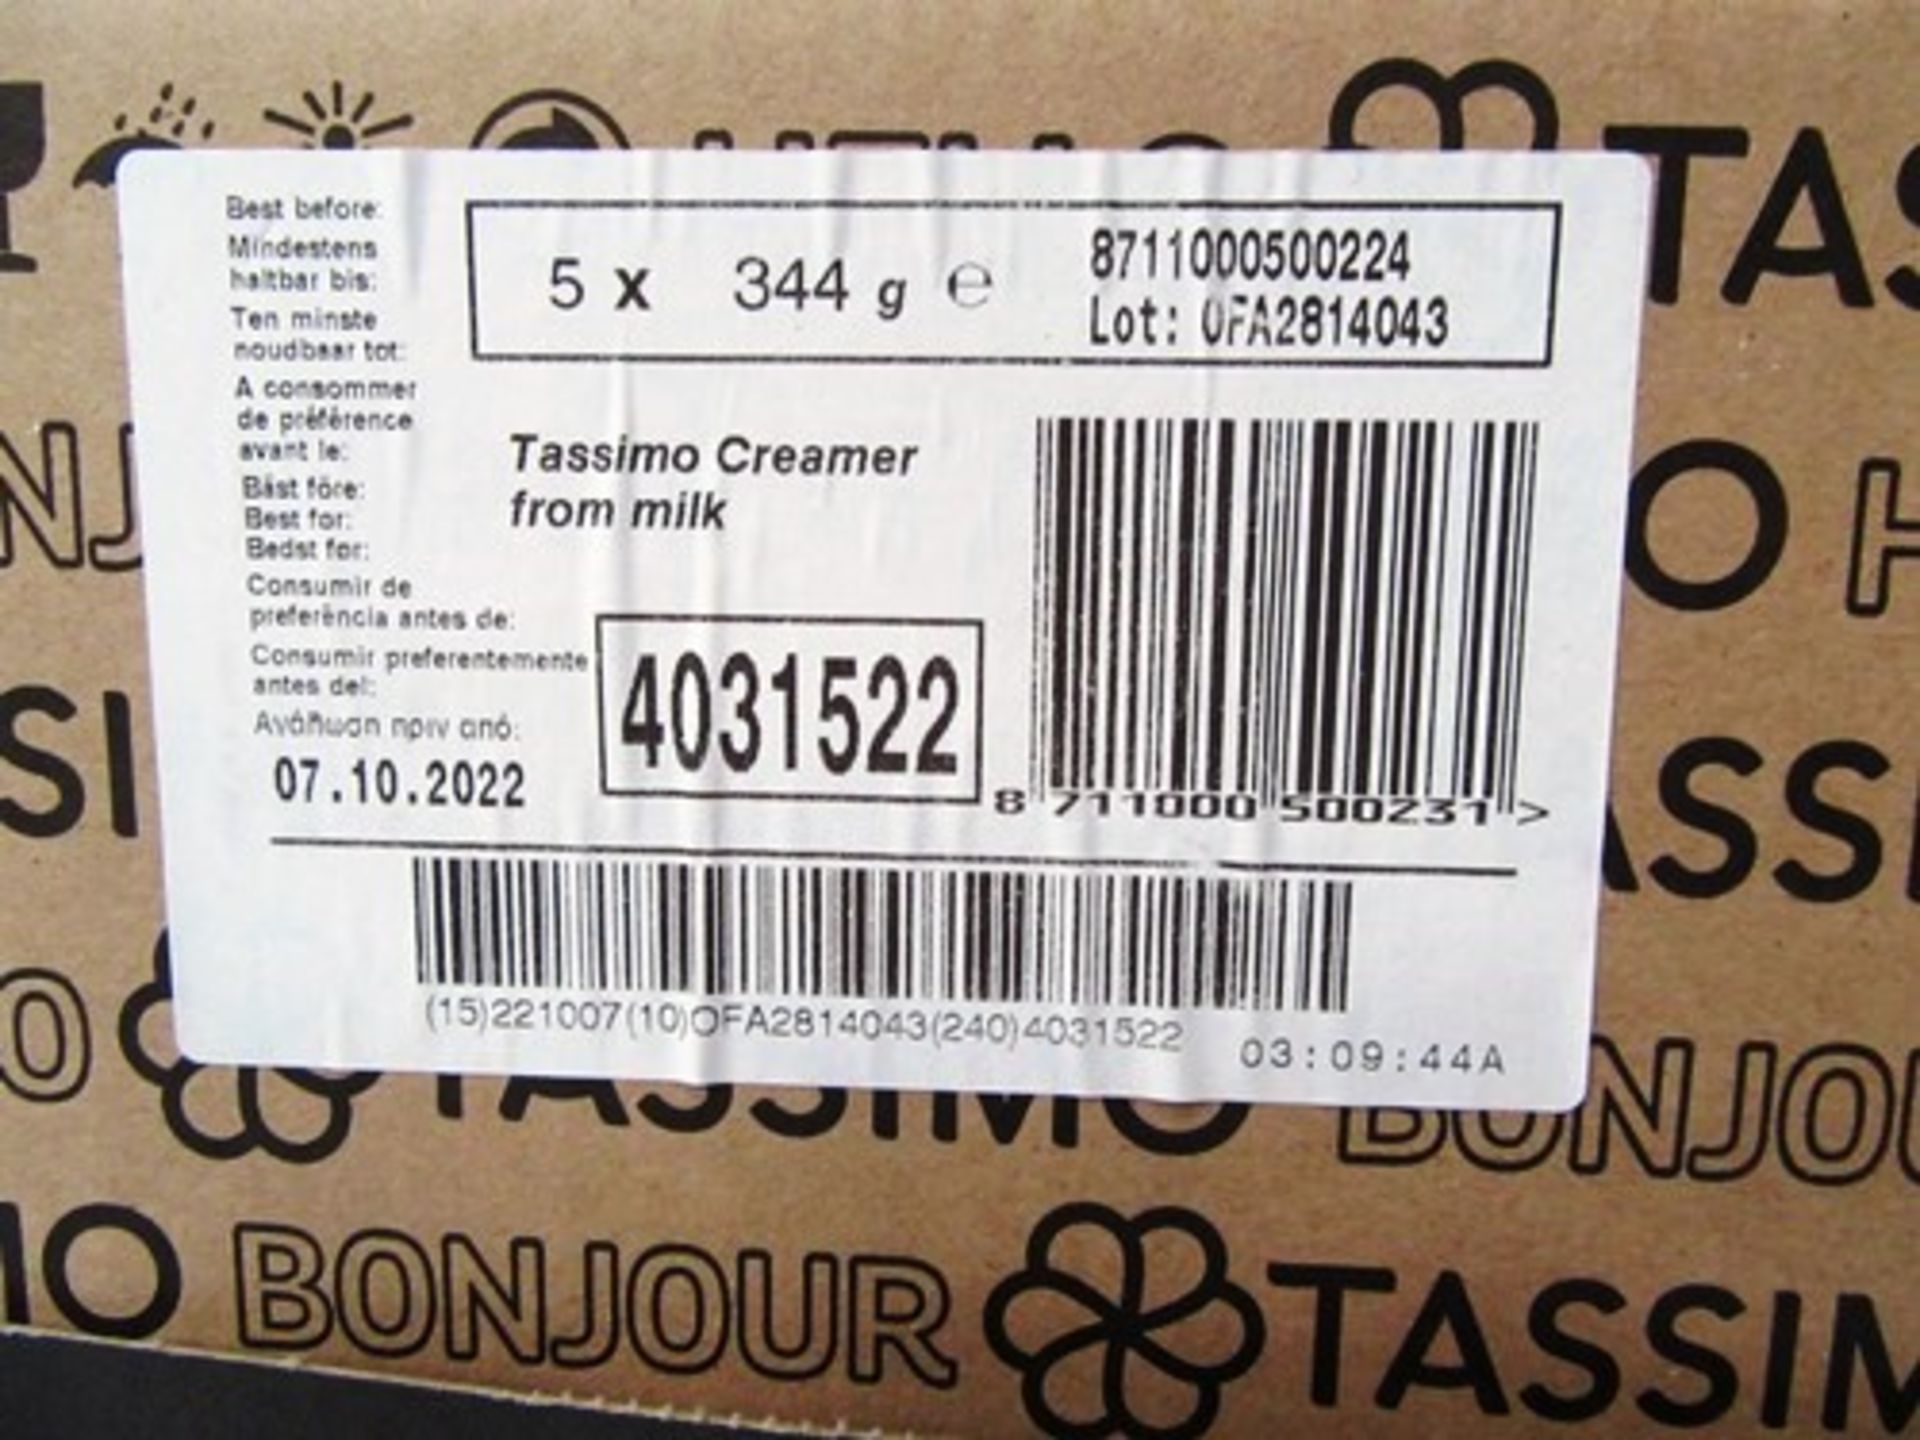 6 x boxes each containing 5 x 223.2g Tassimo products, to include L'or latte Macchiato, Creamer, - Image 3 of 8